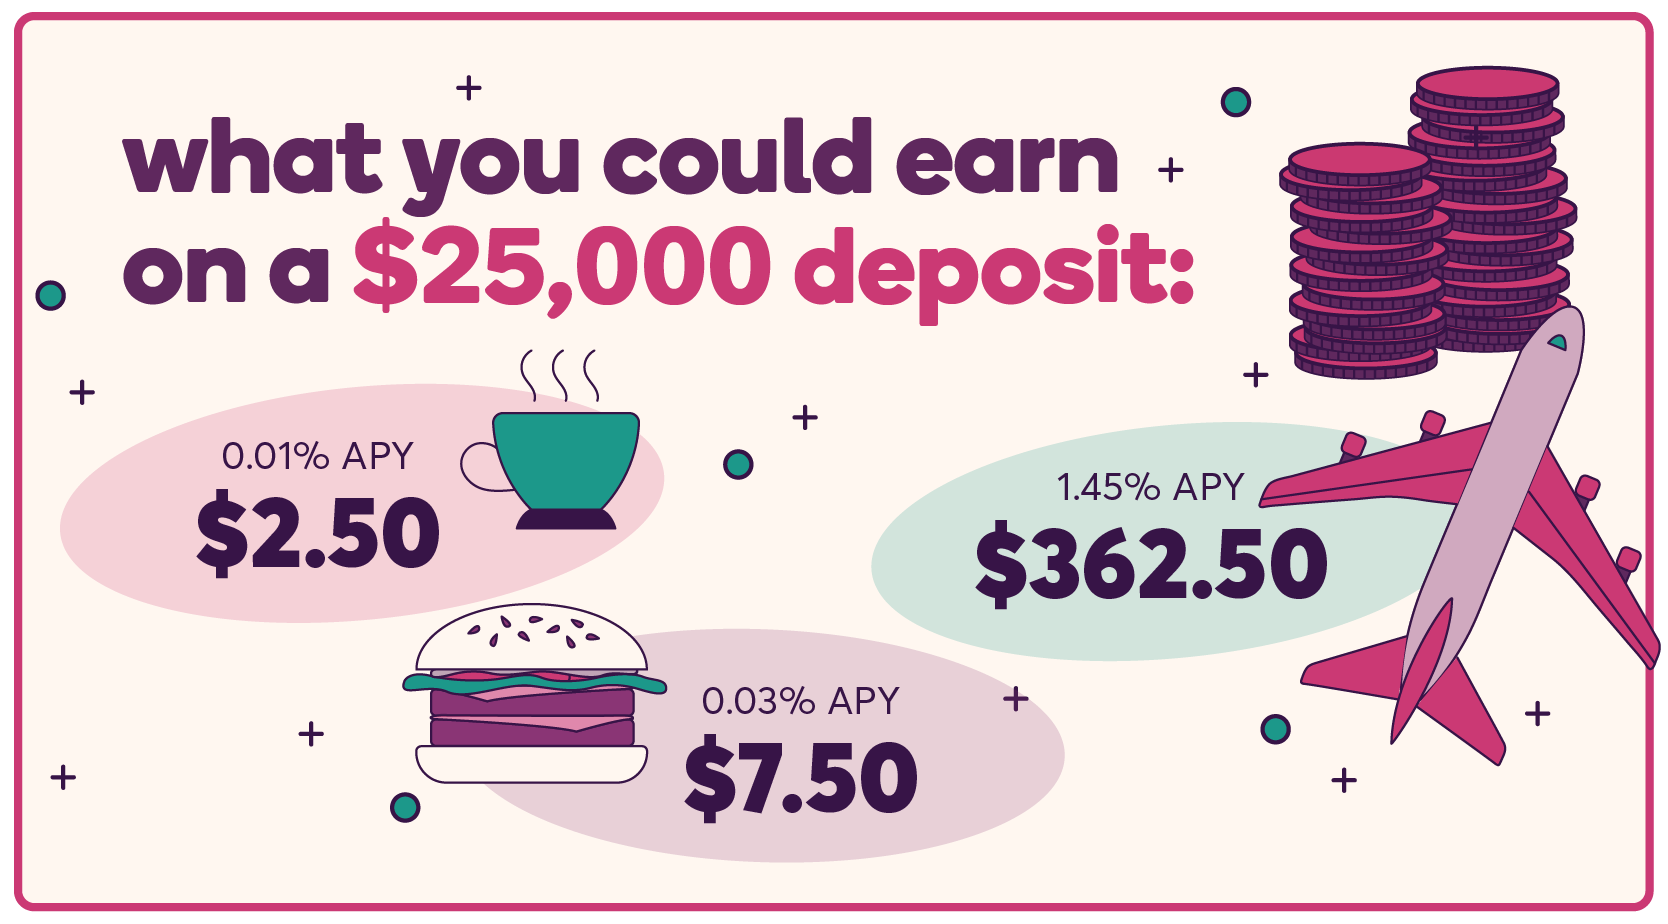 Illustration of a stack of coins with text: “what could you earn on a $25,000 deposit.” Coffee much with text: 0.01% APY, $2.50. Burger with text 0.03 APY. $7.50. Airplane with text: 1.45% APY, $362.50. 